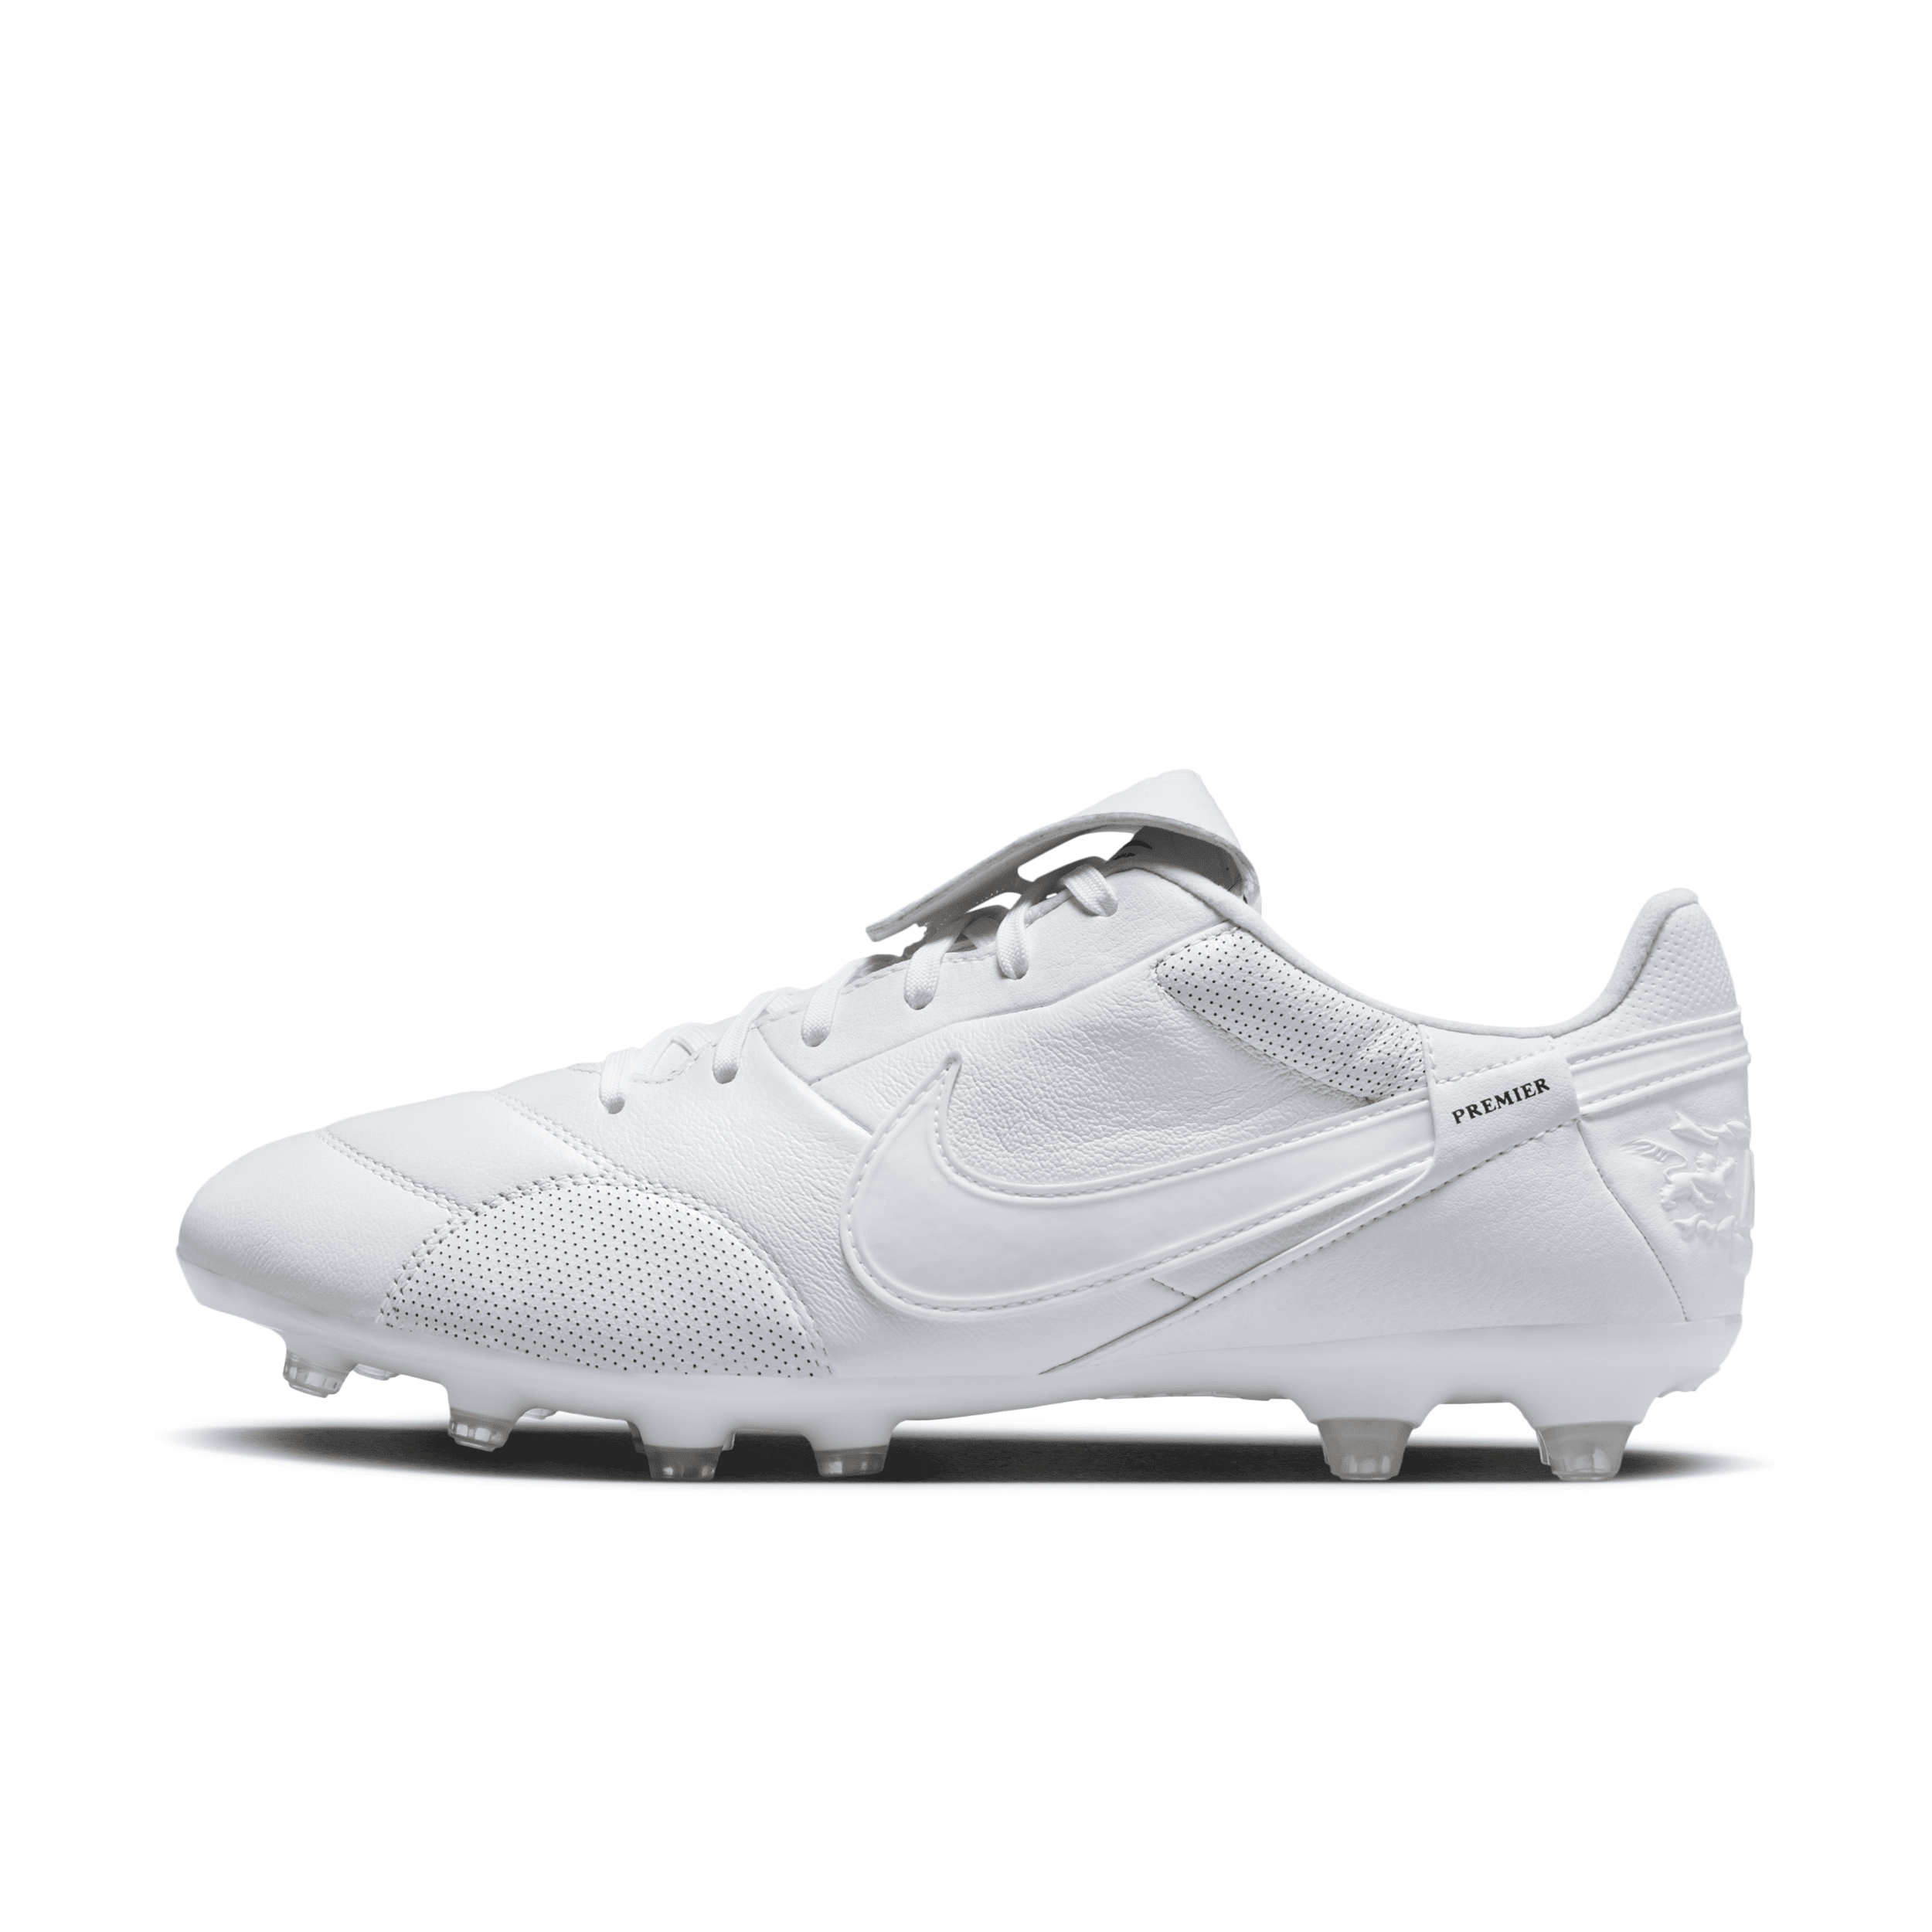 Nike Men'spremier 3 Firm-ground Soccer Cleats In White